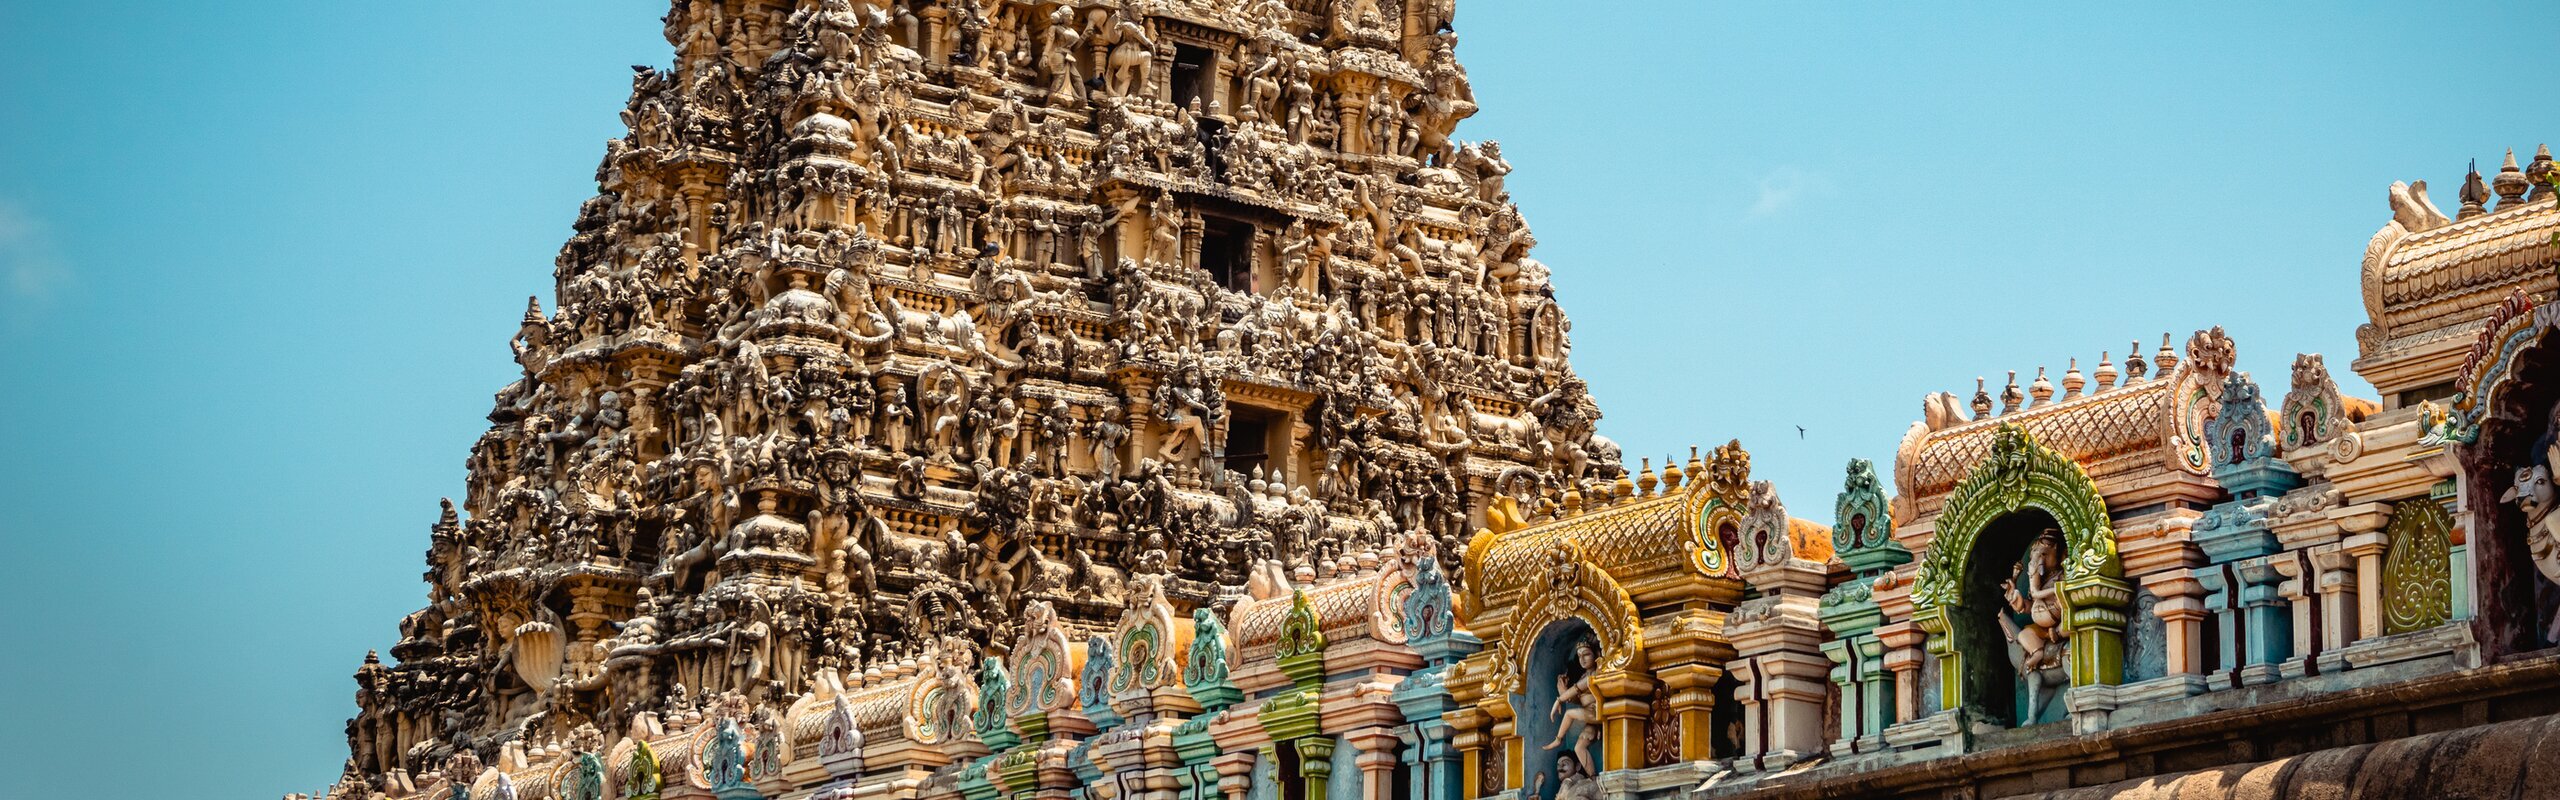 12-Day Historical and Idyllic South India Tour